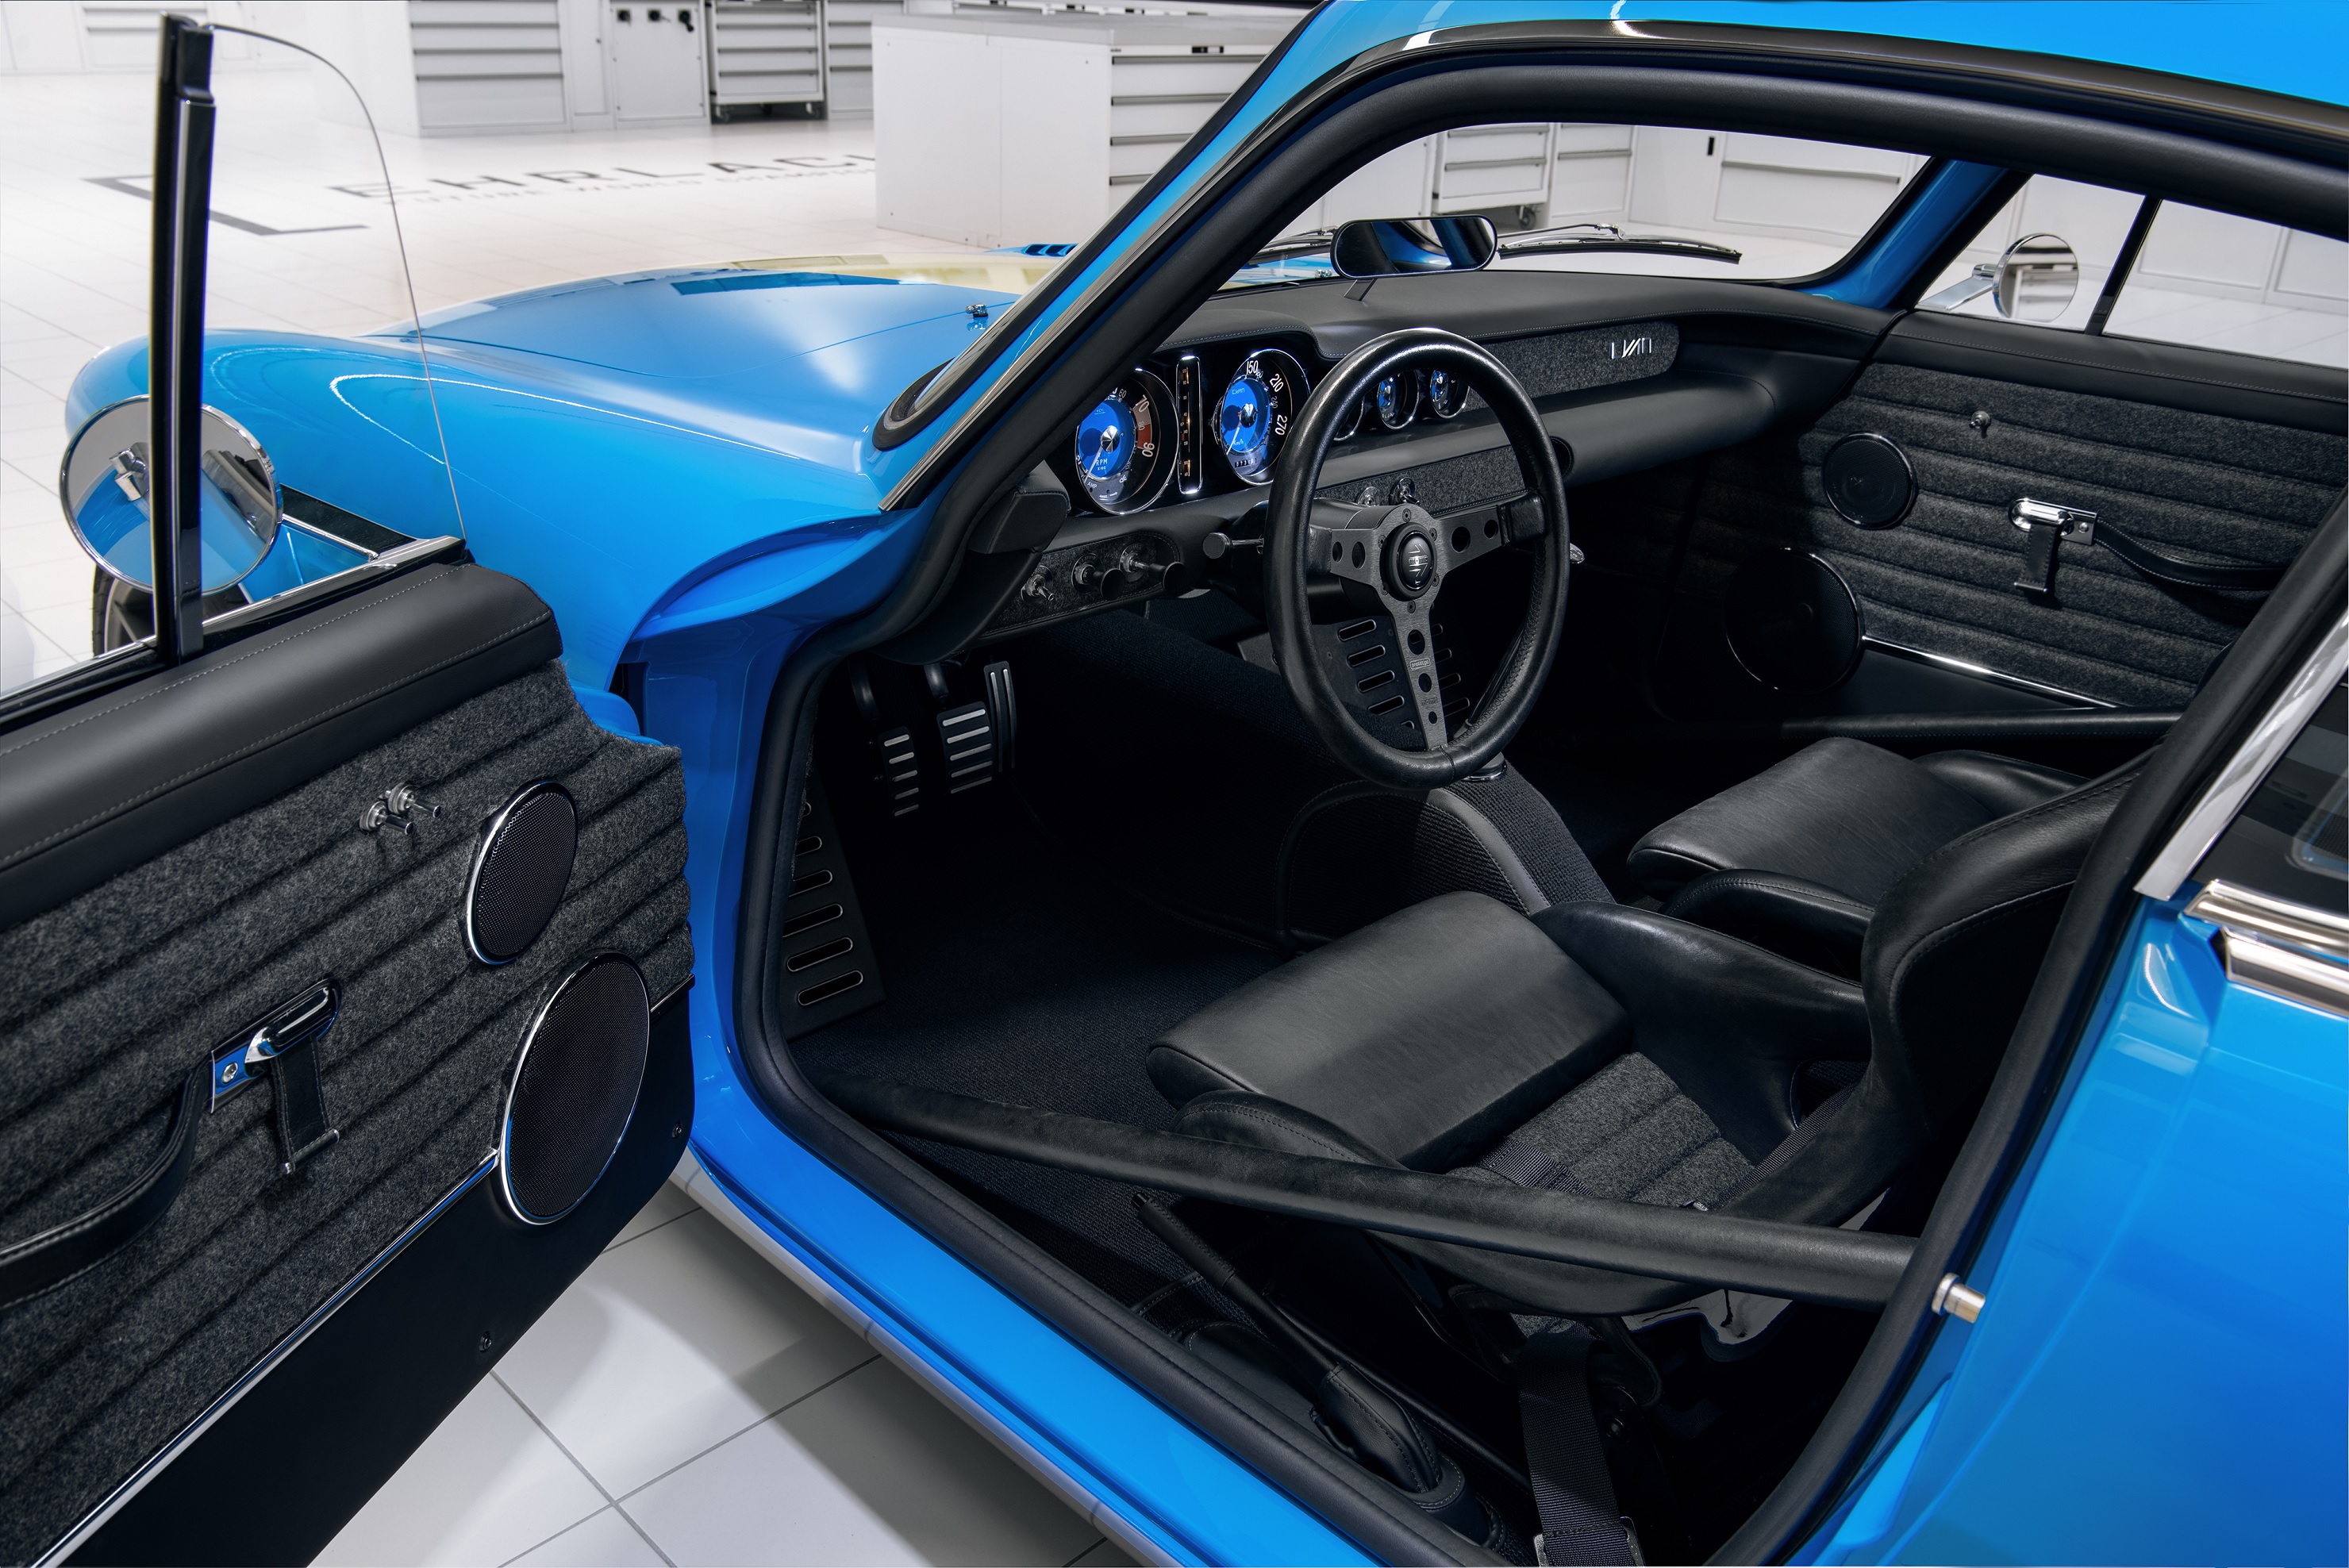 The black Recaro seats, roll bar and dashboard of a blue Volvo P1800 Cyan in a white garage